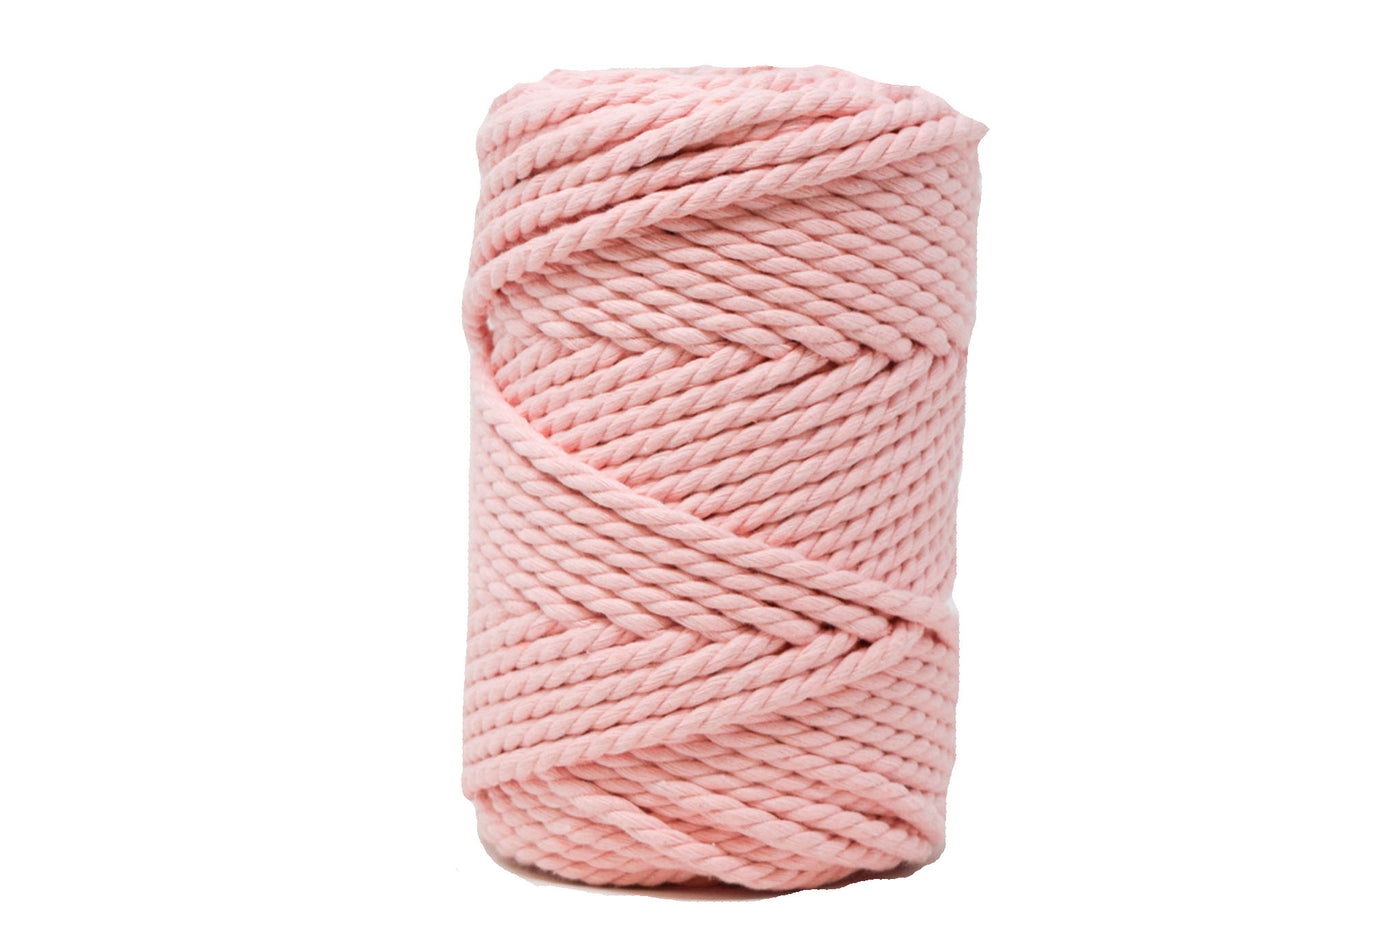 COTTON ROPE ZERO WASTE 5 MM - 3 PLY - CHERRY BLOSSOM COLOR